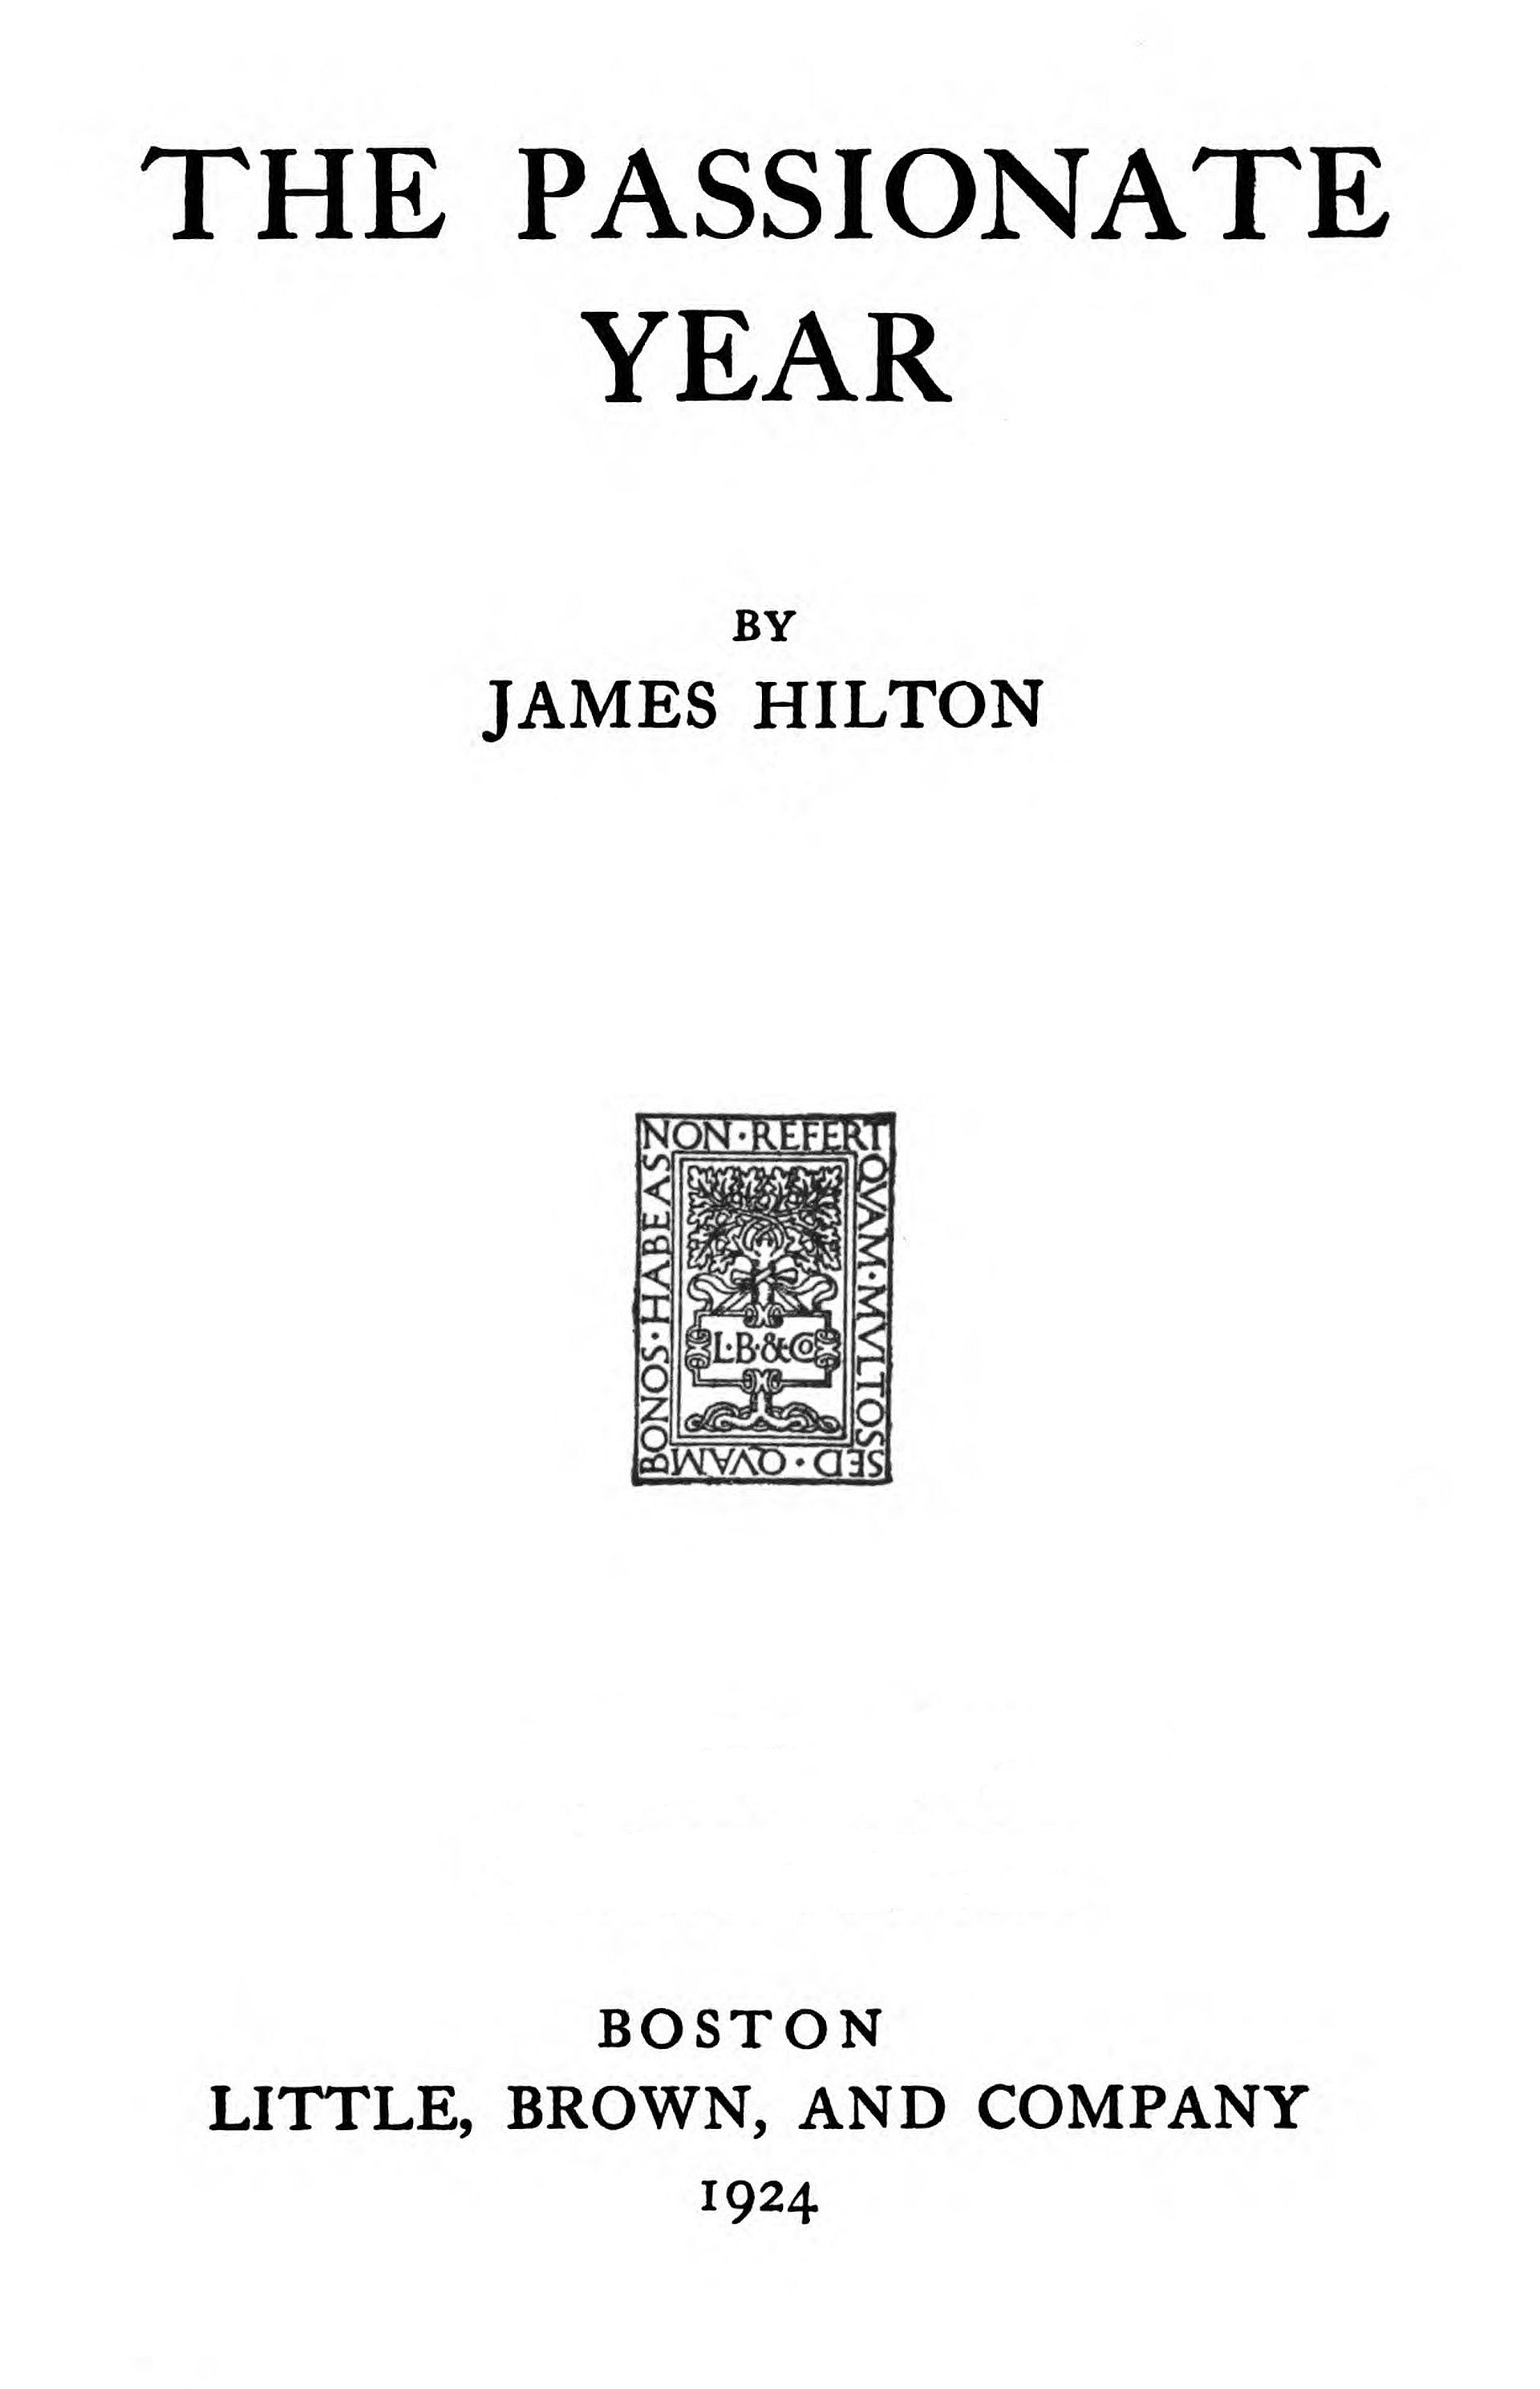 The Project Gutenberg eBook of The passionate year by James Hilton.